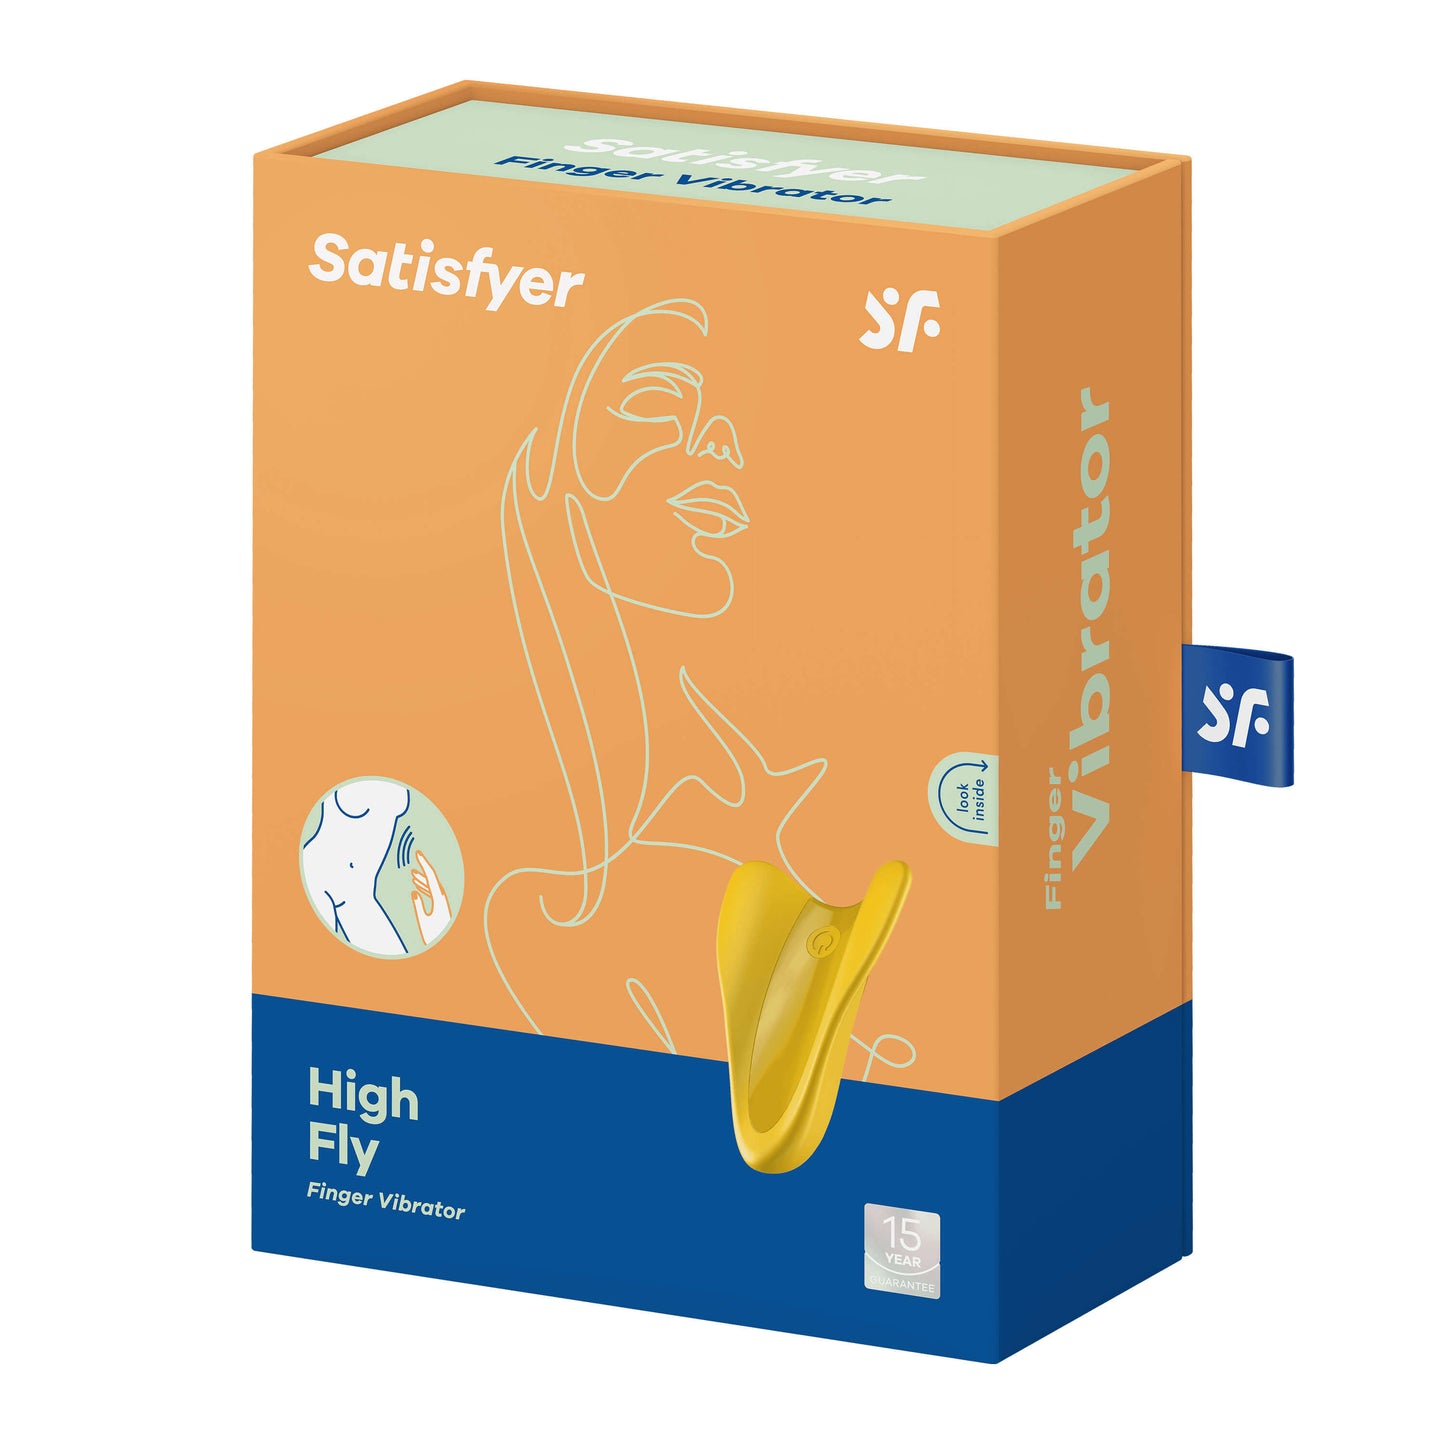 Satisfyer High Fly Finger Vibrator Packaging - The Bigger O - an online sex toy shop. We ship to USA, Canada and the UK